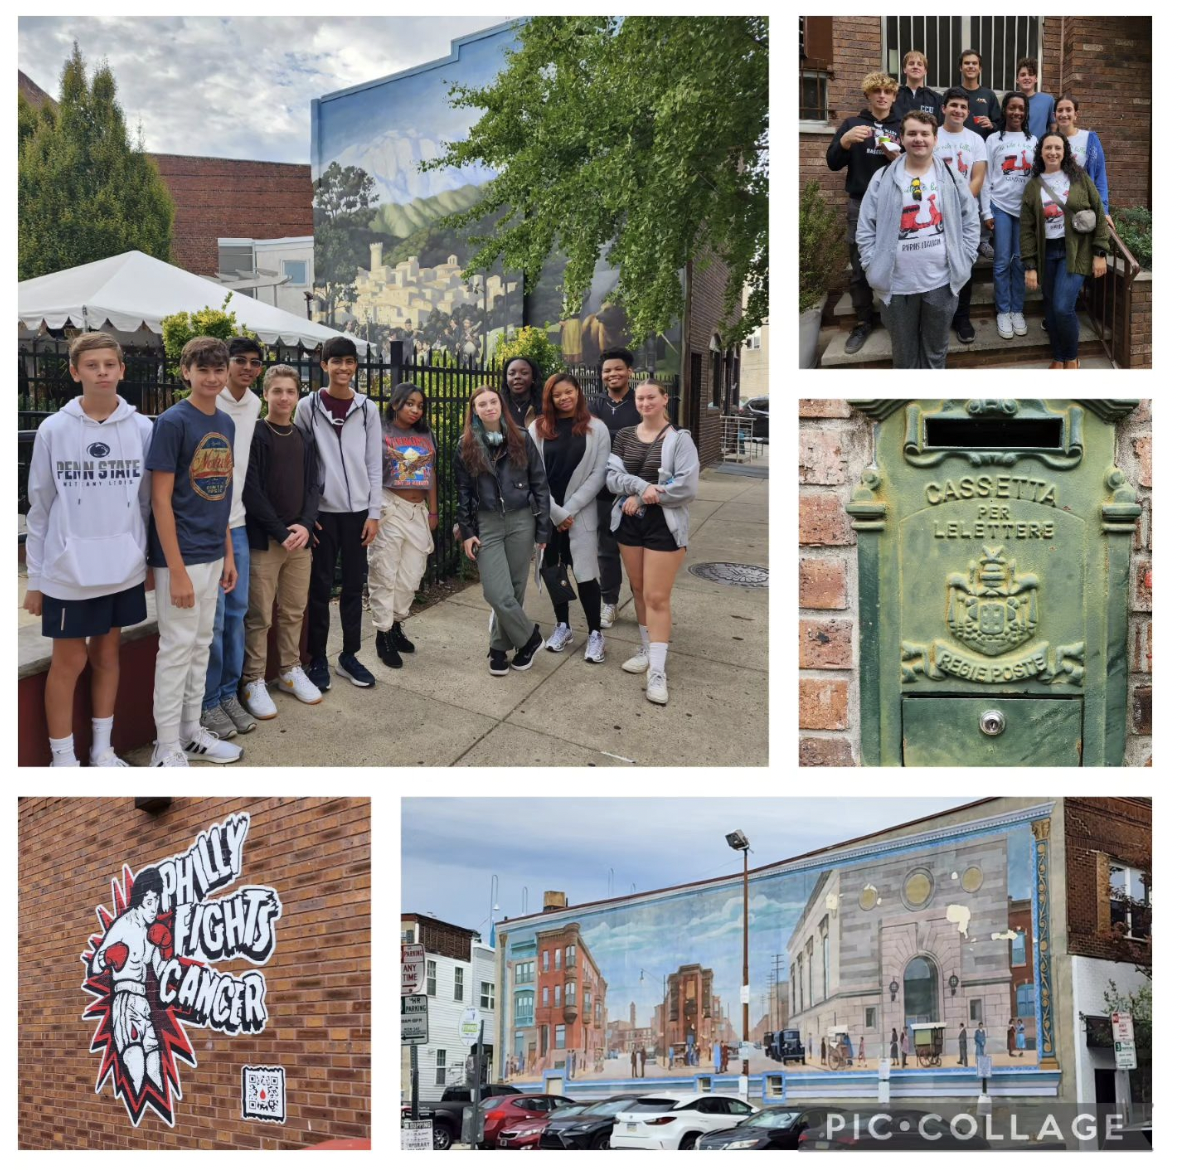 The Italian club on its walking tour of Philadelphia last week. The tour included lunch and a peek at some famous spots and murals around the city.